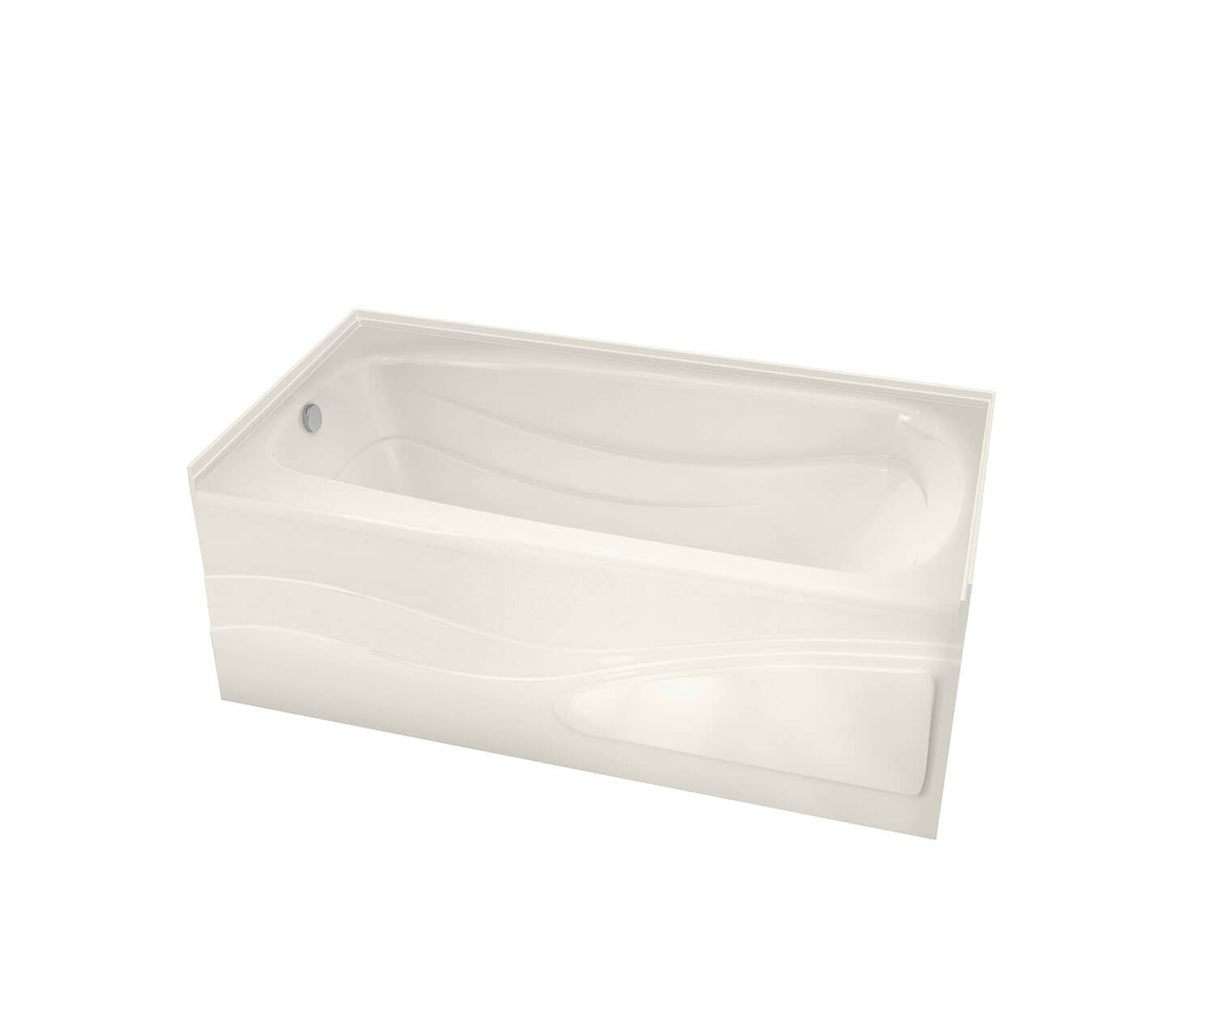 MAAX 102205-000-007-001 Tenderness 6042 Acrylic Alcove Left-Hand Drain Bathtub in Biscuit